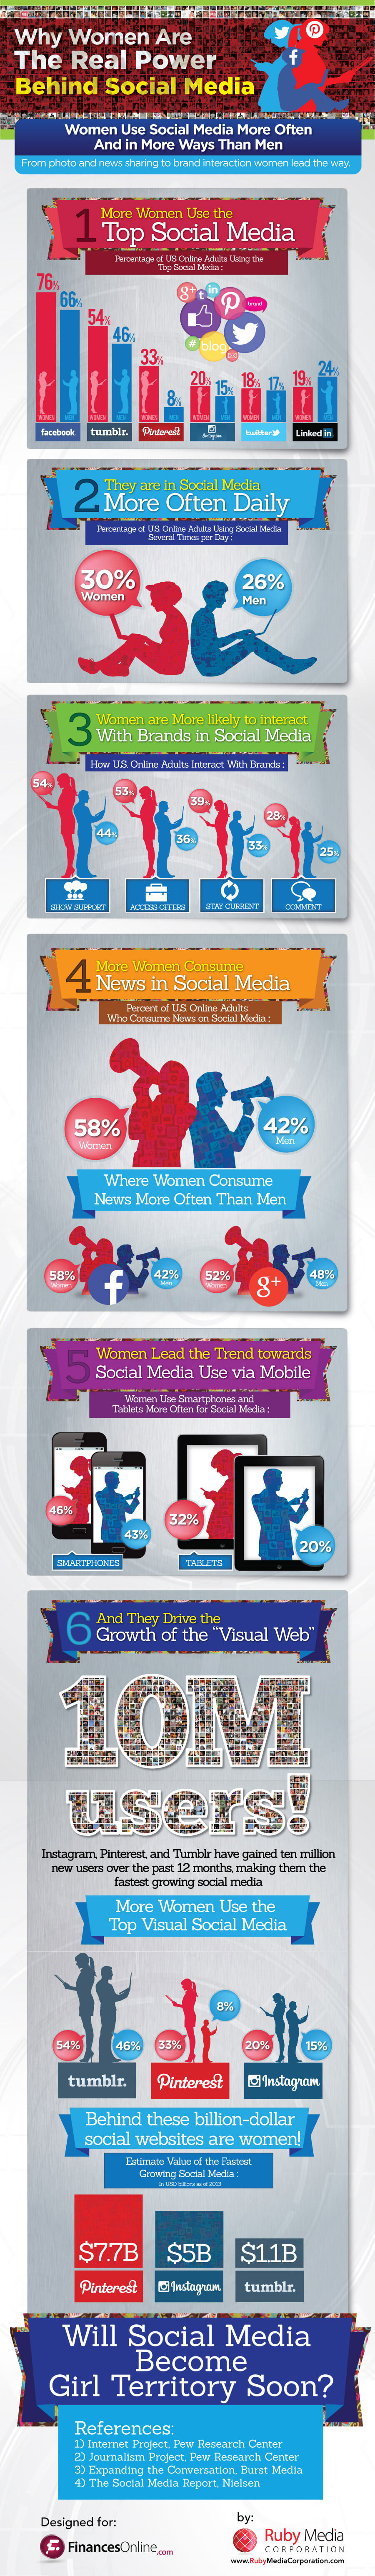 Why Women Are the Real Power behind Social Media